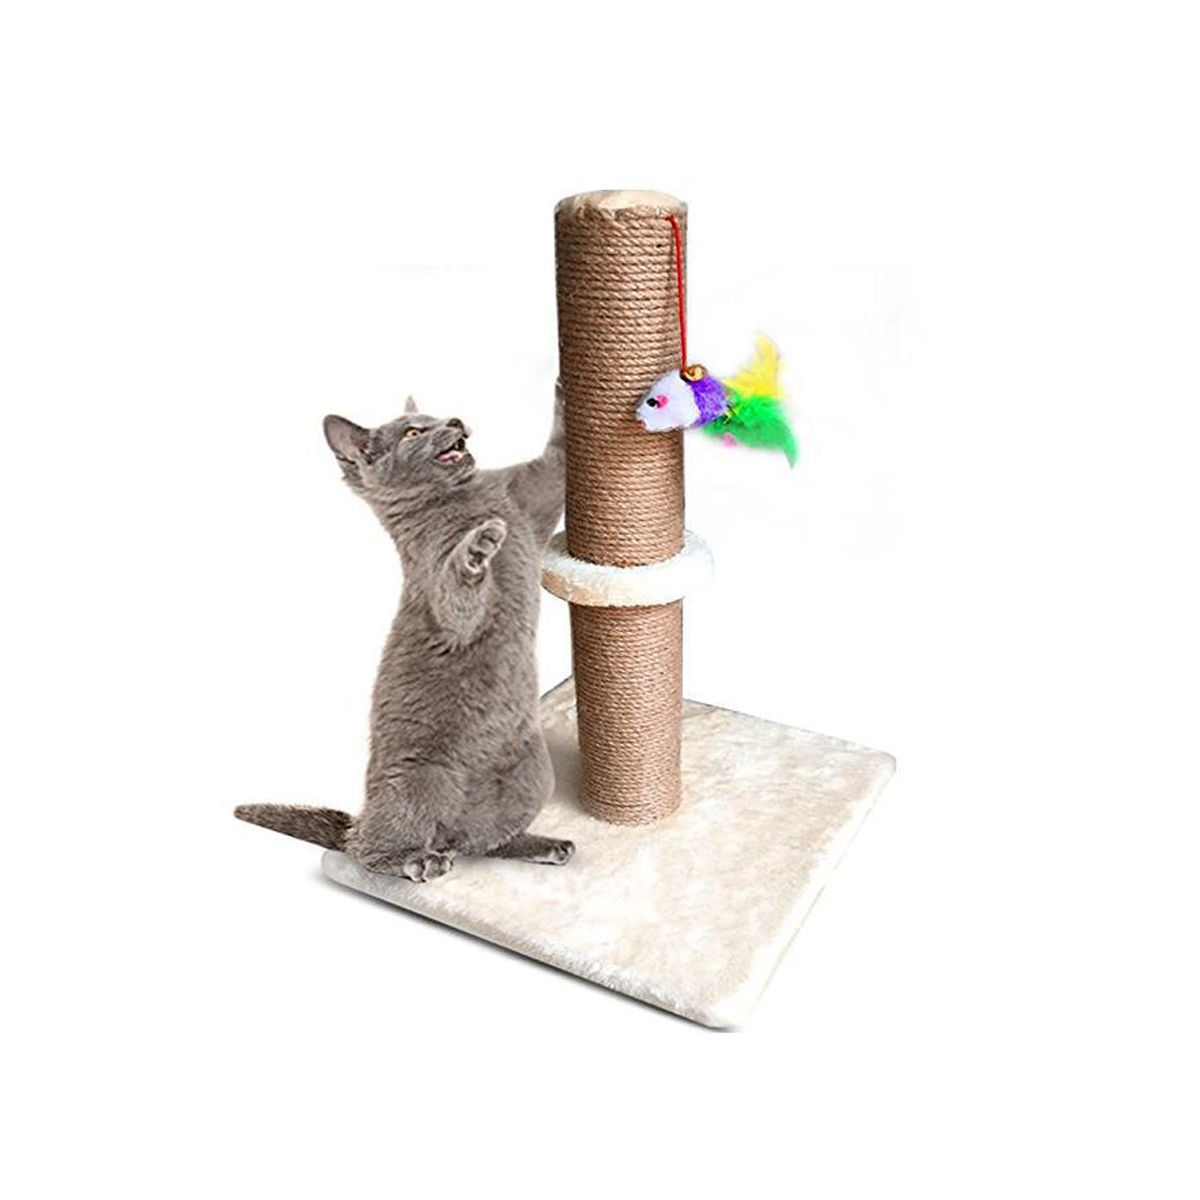 Cat-Scratching-Post-Cat-Interactive-Toys-with-Toy-Cat-Scratch-Post-Cats-Kittens-Hemp-Rope-Cat-Scratc-1913035-9